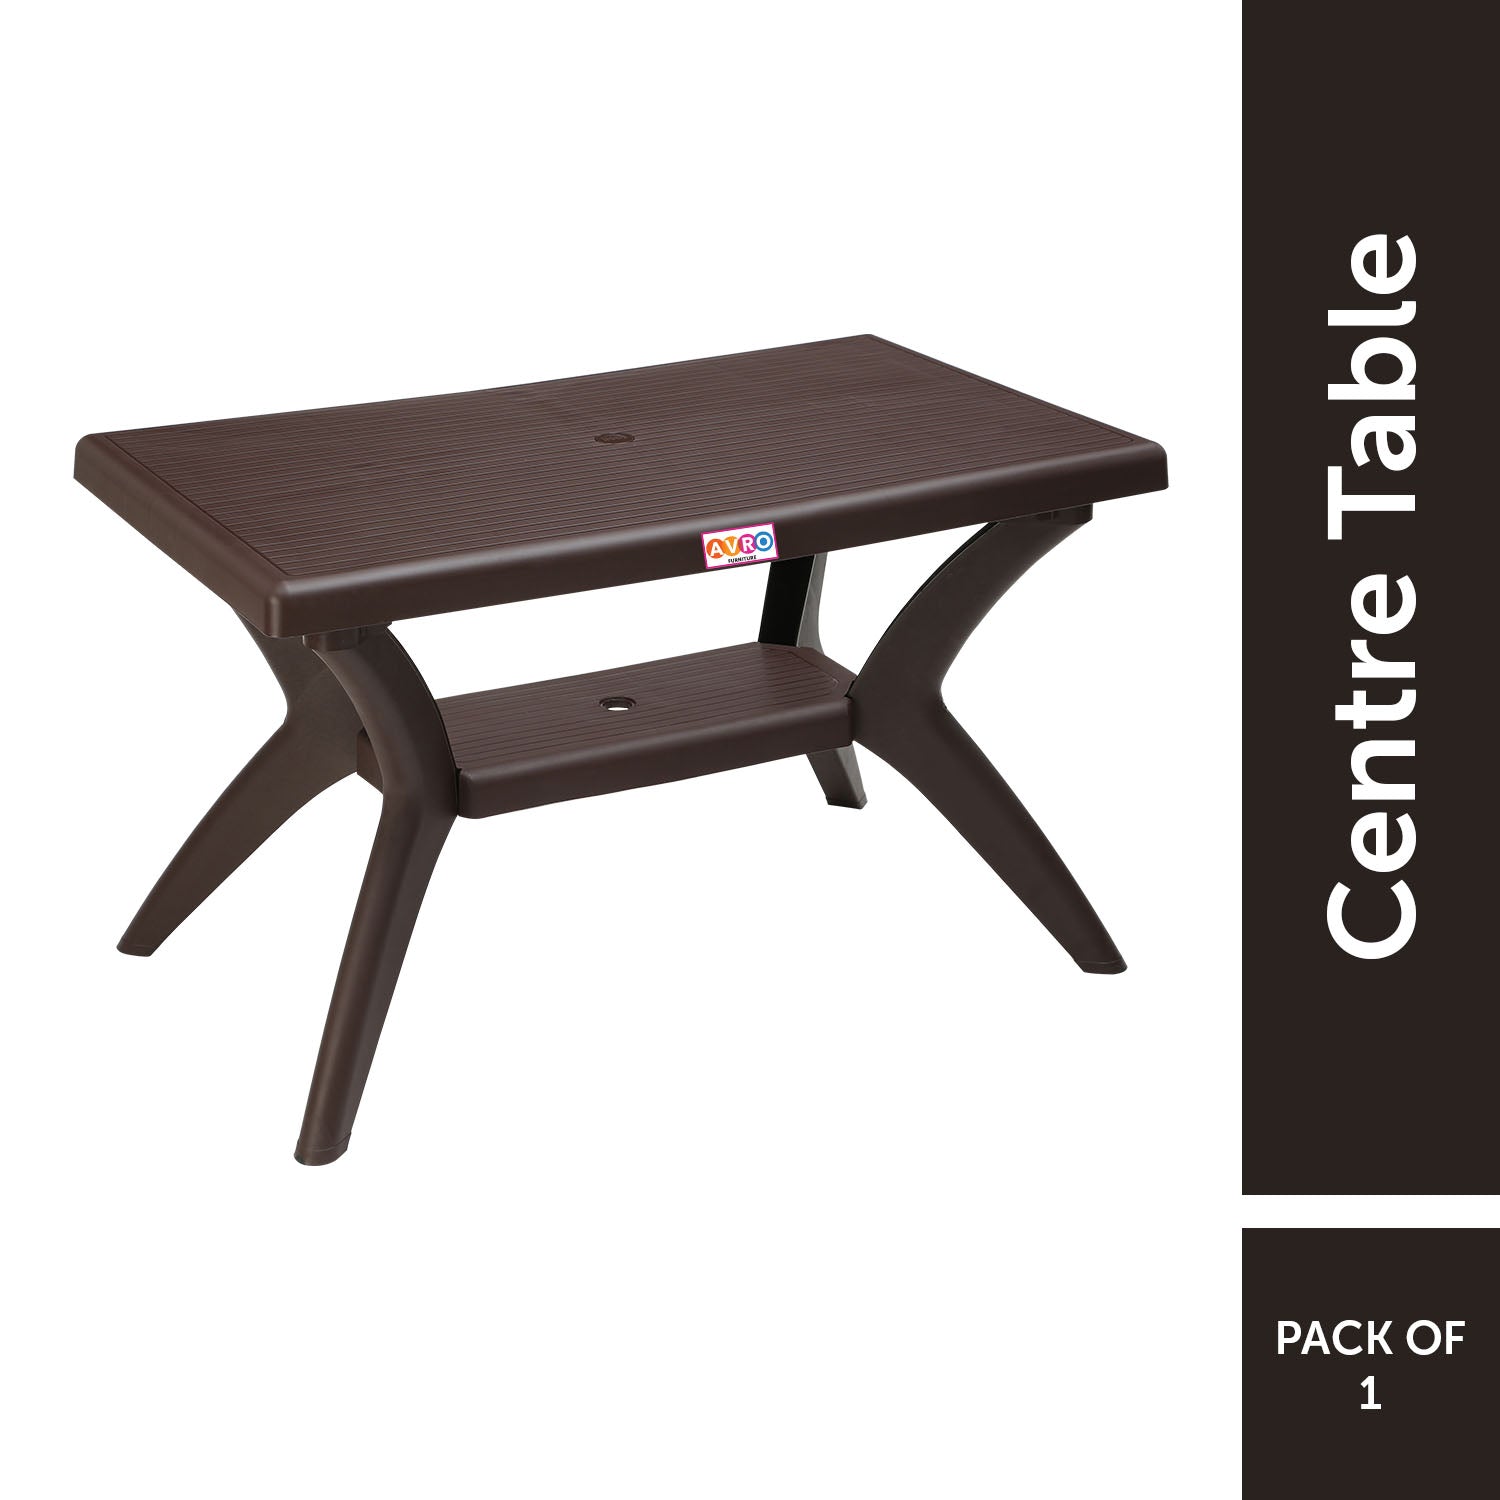 Magna Dining Table Double TOP